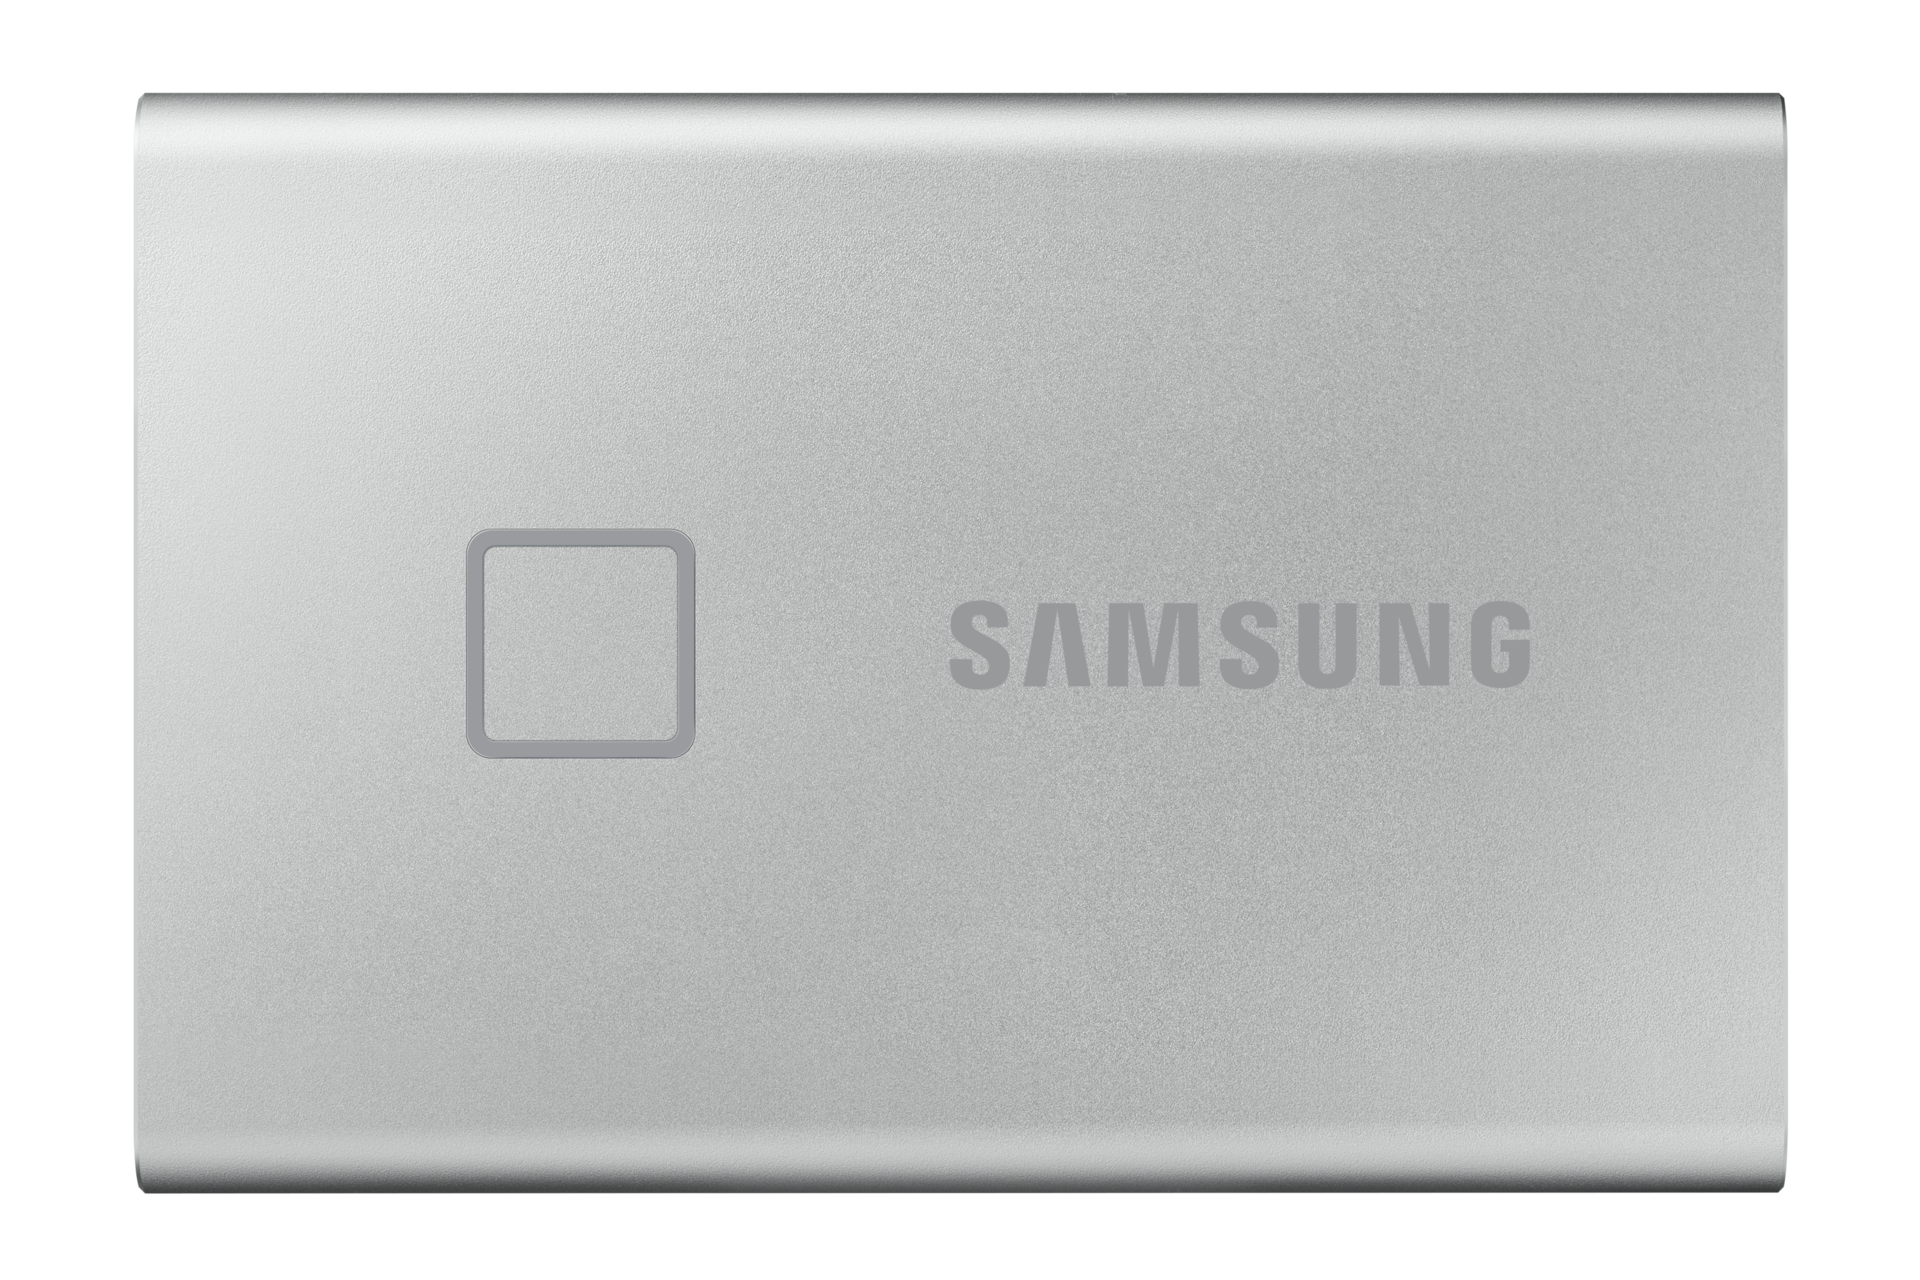 Samsung SSD T7 Touch 2TB - Silver, Silver